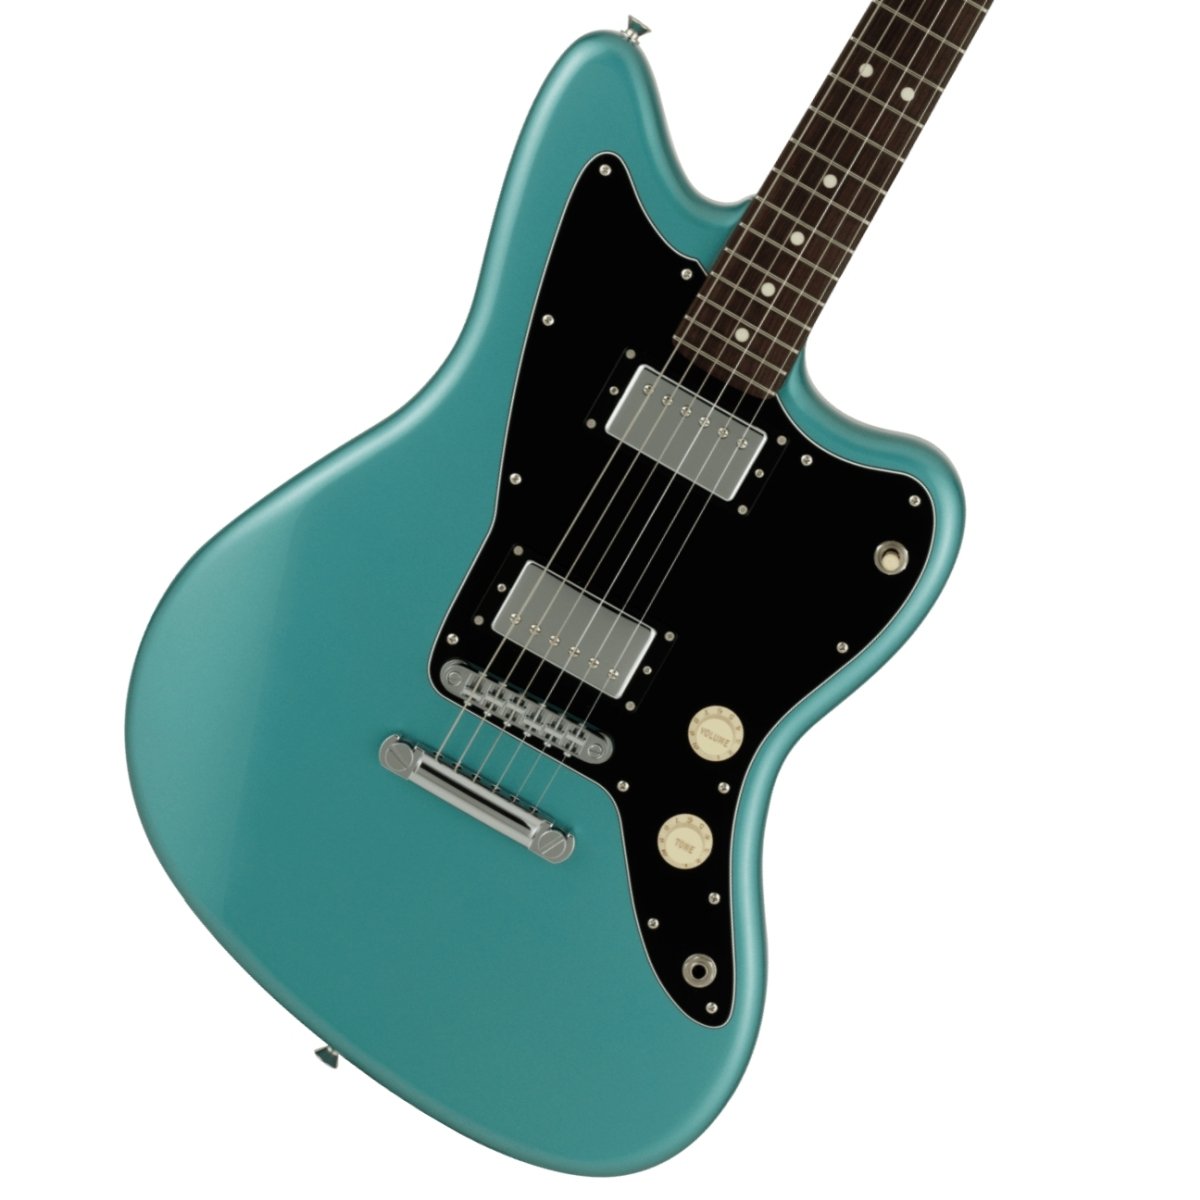 sWEBSHOPNAXZ[tFender / Made in Japan Limited Adjusto-Matic Jazzmaster HH Rosewood Fingerboard Teal Green Metallic [2023N胂f]s+4582600680067tyPNGz(OFFSALE)